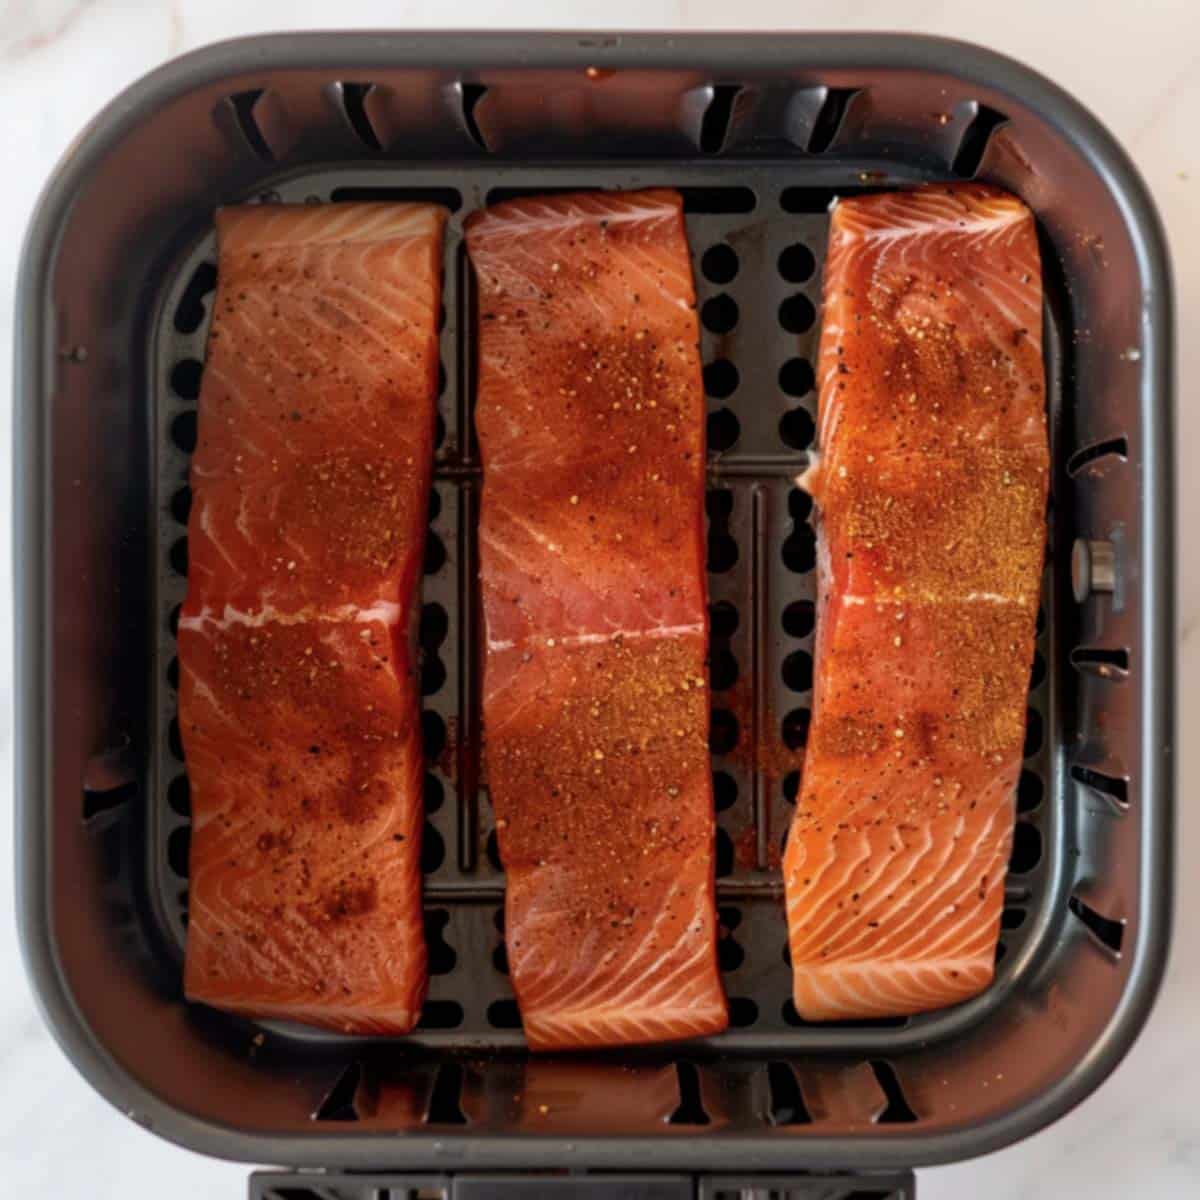 Salmon fillets in an air fryer basket, ready to cook into delicious air fryer salmon tacos.